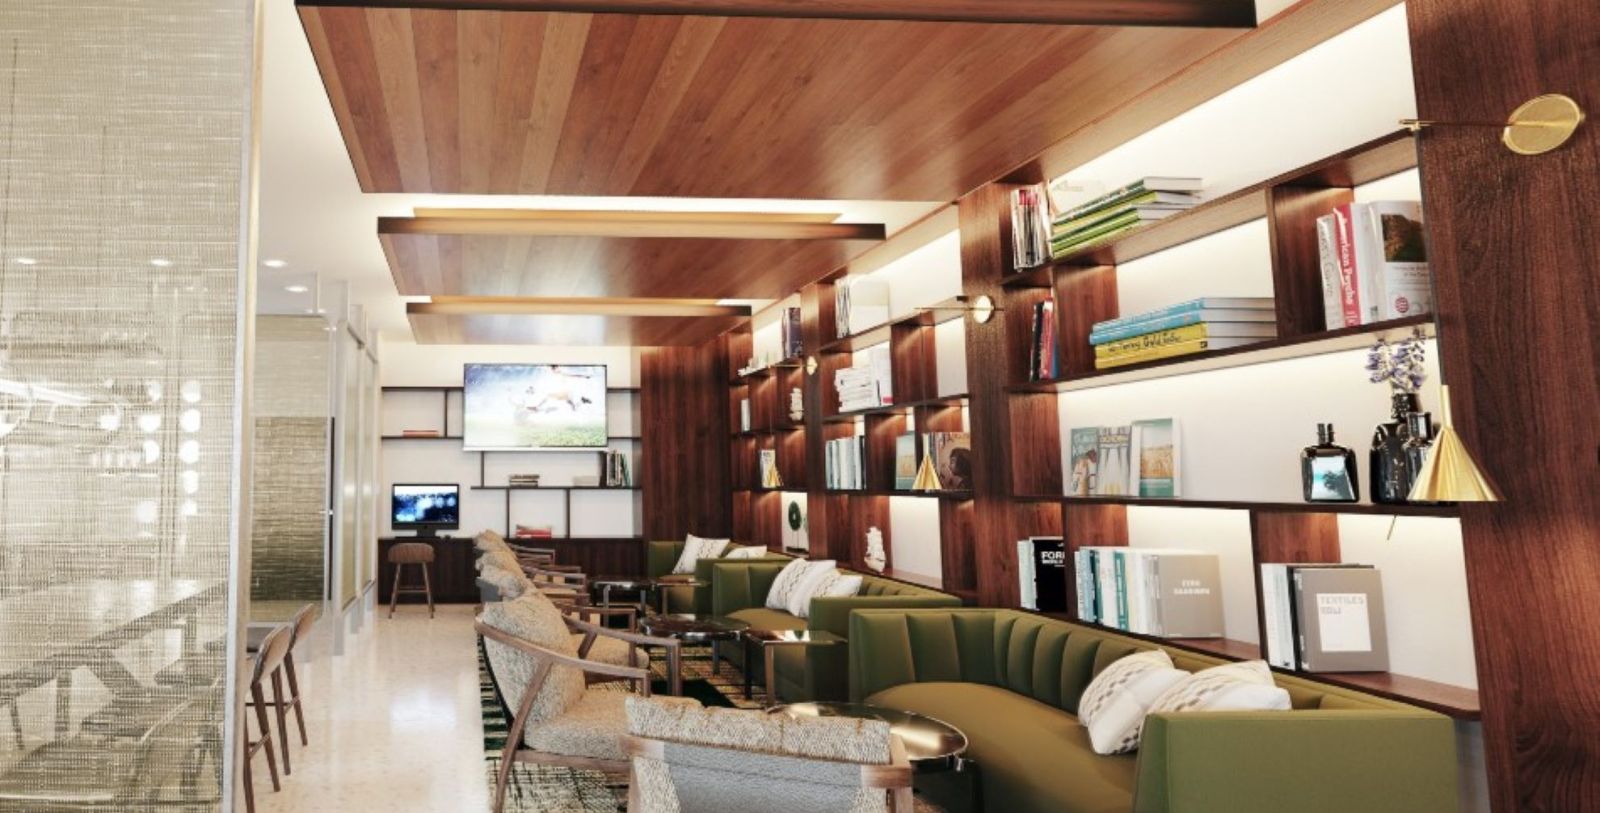 Discover the mid-century modern design of Le Méridien Fort Worth Downtown.